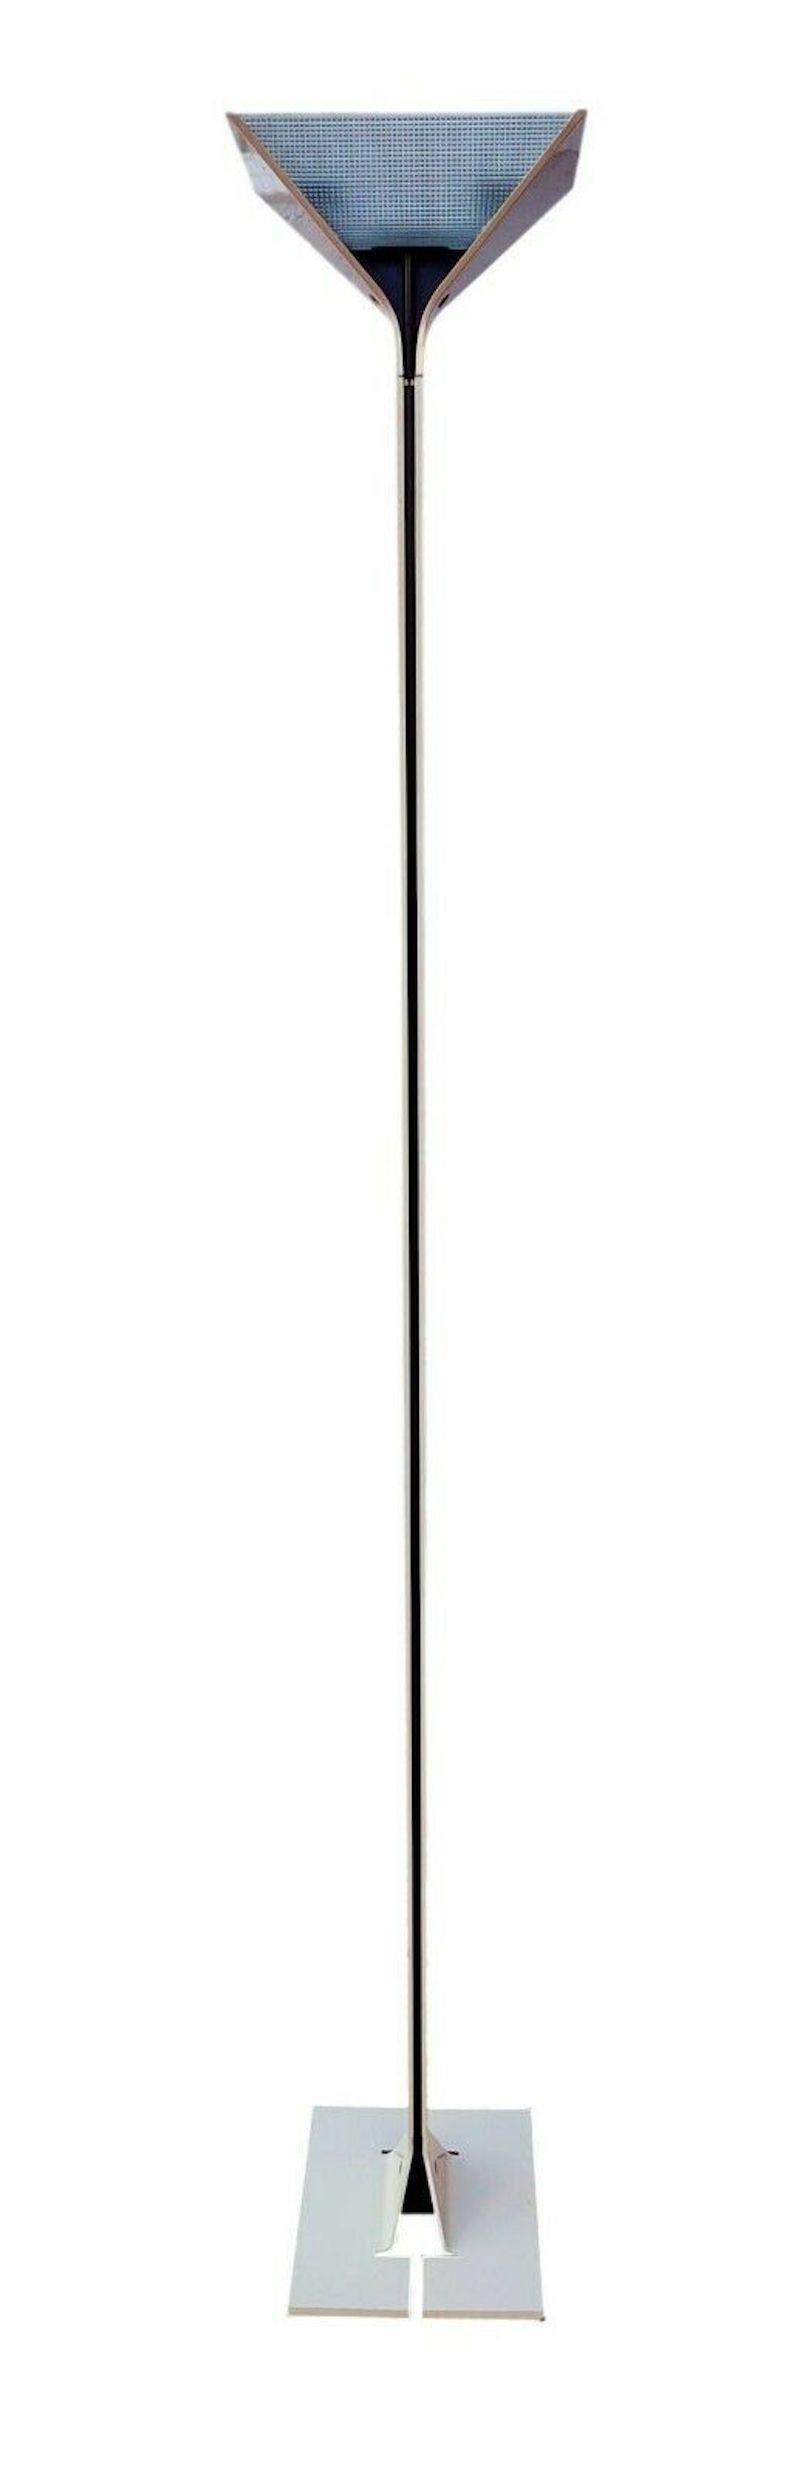 Flos floor lamp, Papillona 750 model, design by Tobia Scarpa, 1975

Body in sand beige painted metal, die-cast aluminum base, molded glass diffusers

It measures approximately 190 cm in height, in very good storage conditions, as shown in the